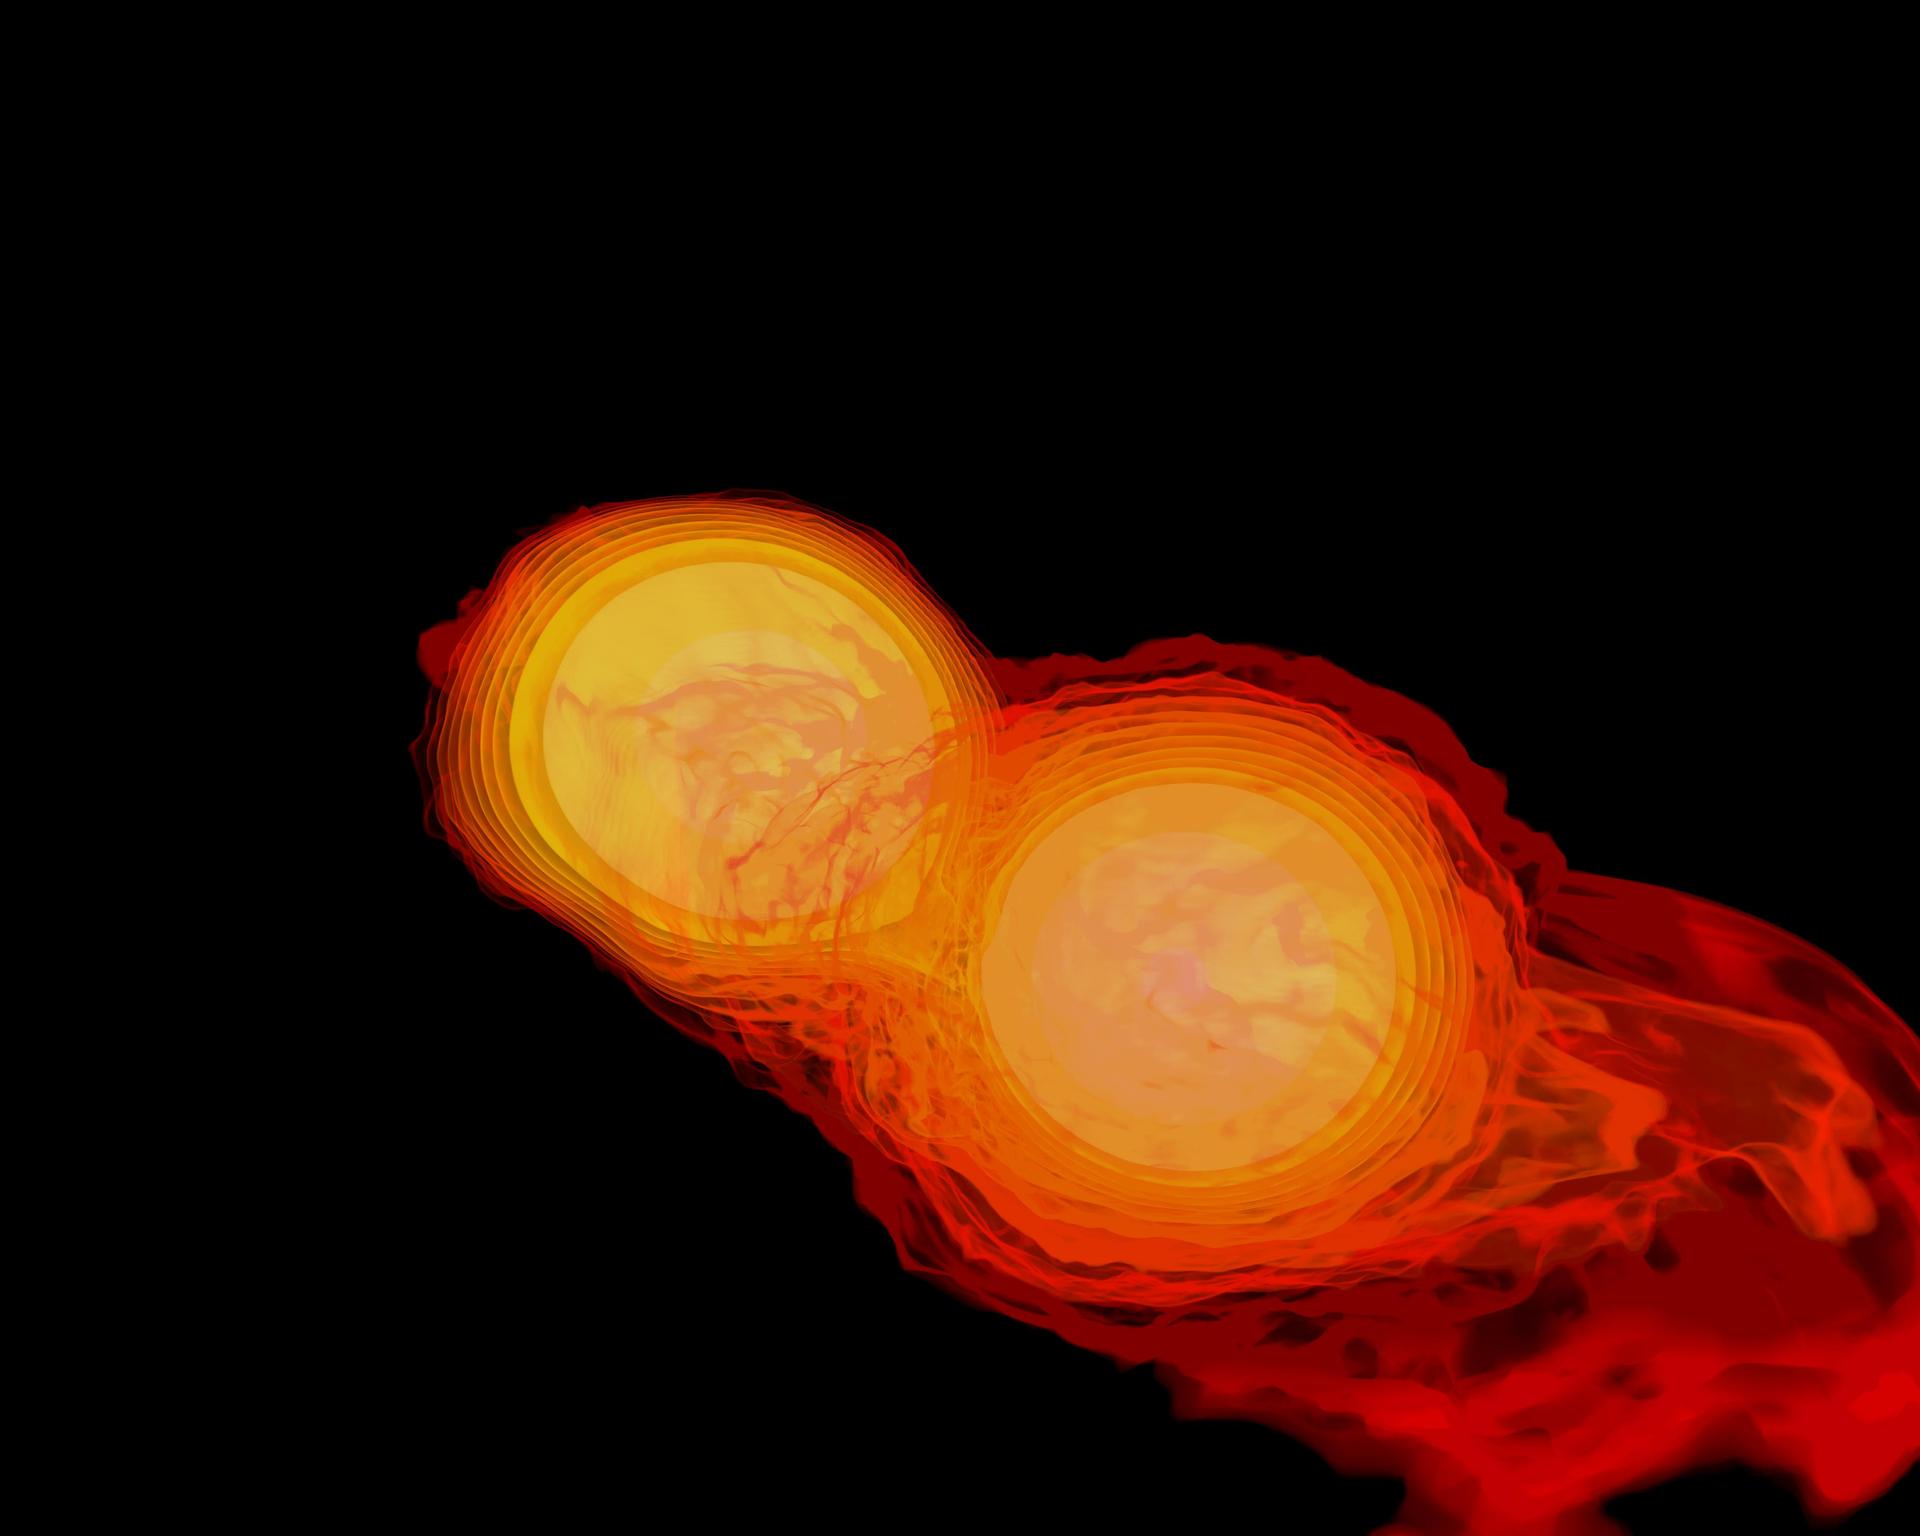 This supercomputer simulation shows one of the most violent events in the universe: a pair of neutron stars colliding, merging and forming a black hole.